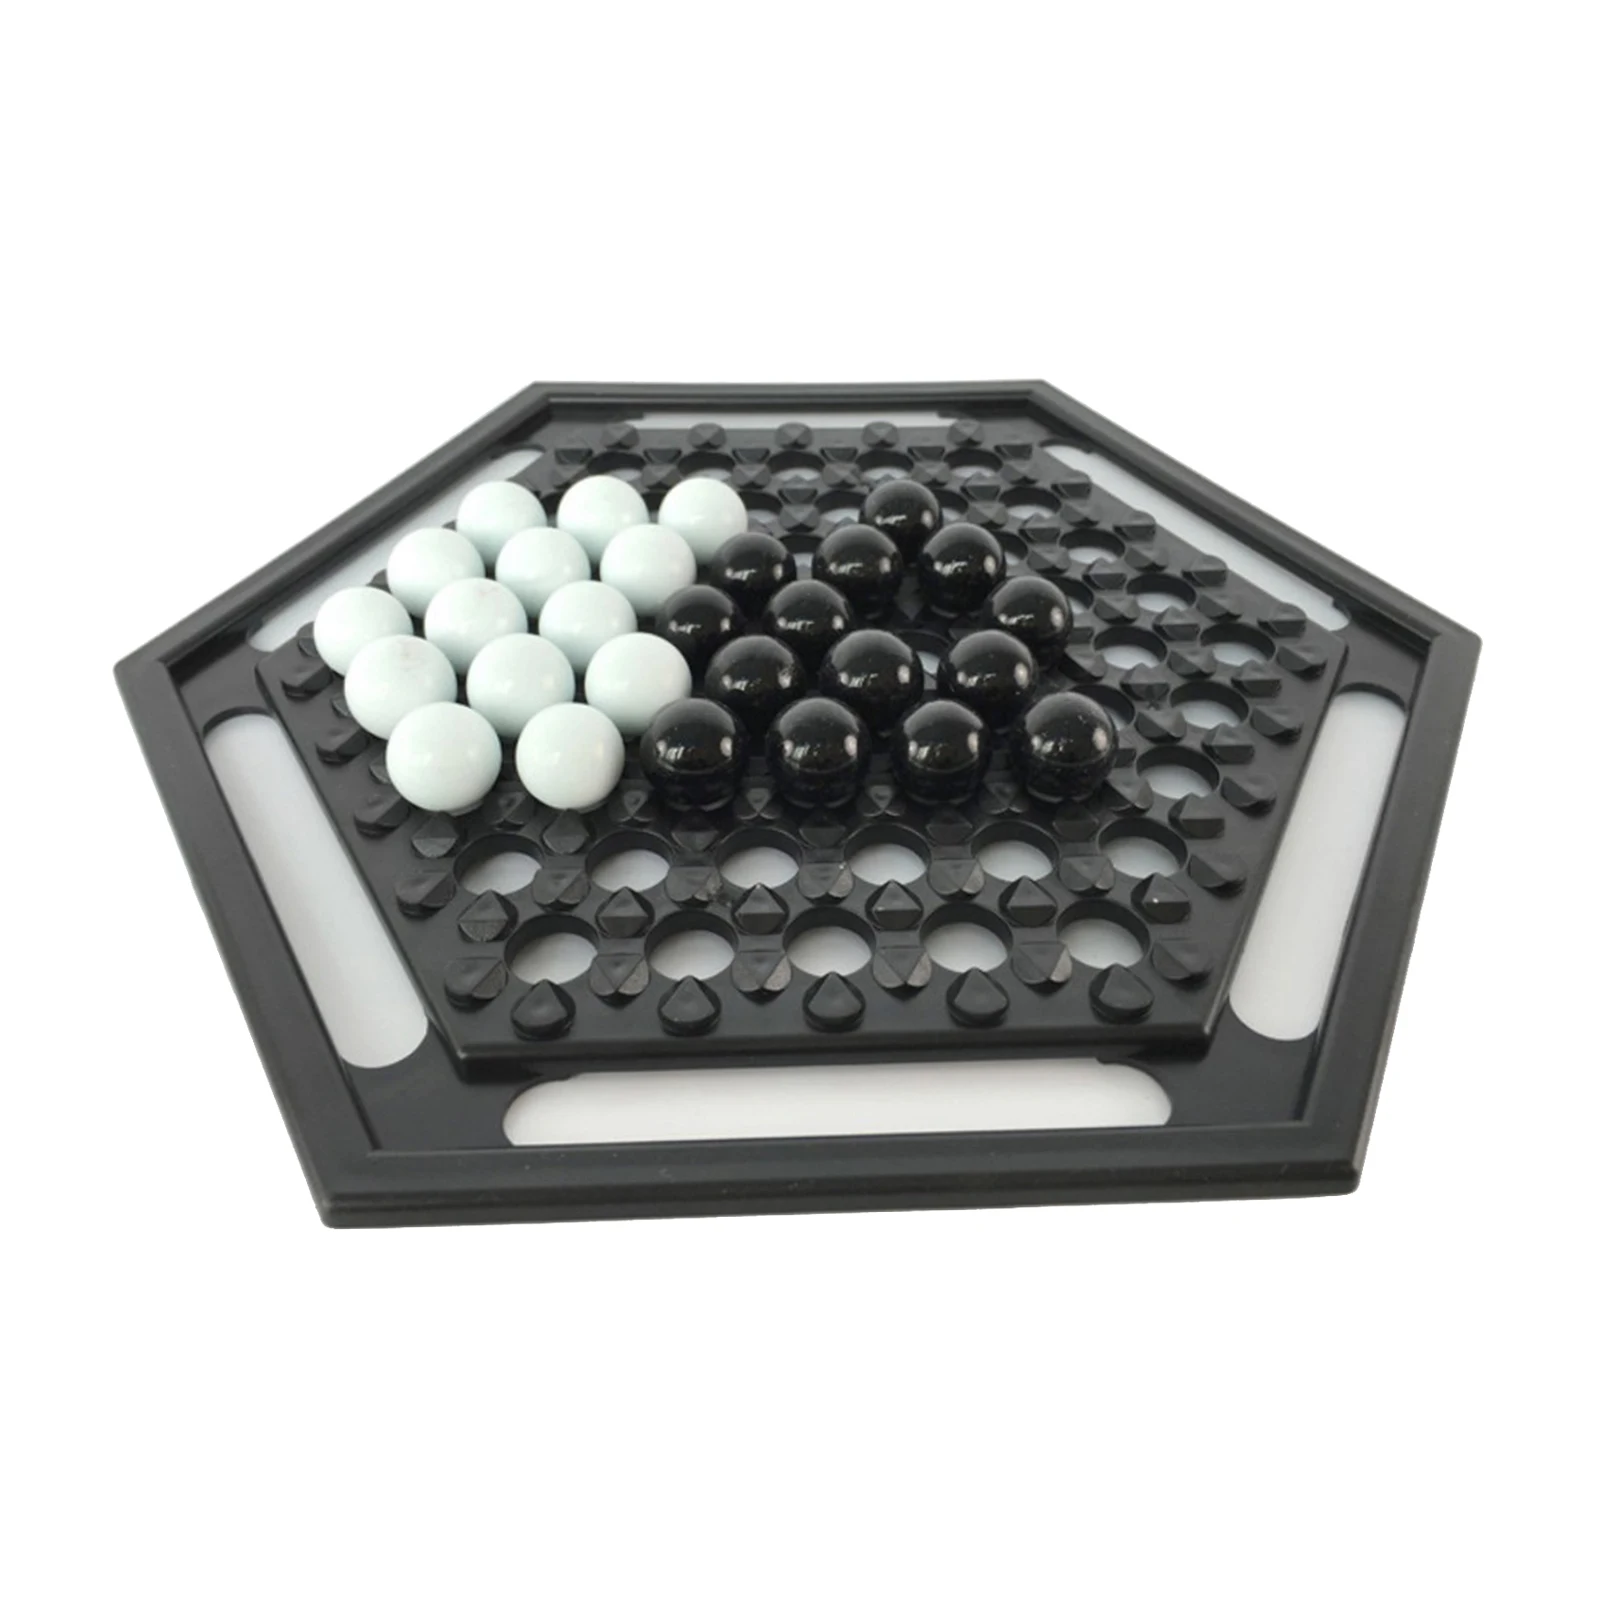 Porcelain and Plastic Table Games, Educational Chess Set Push Chess Board Game